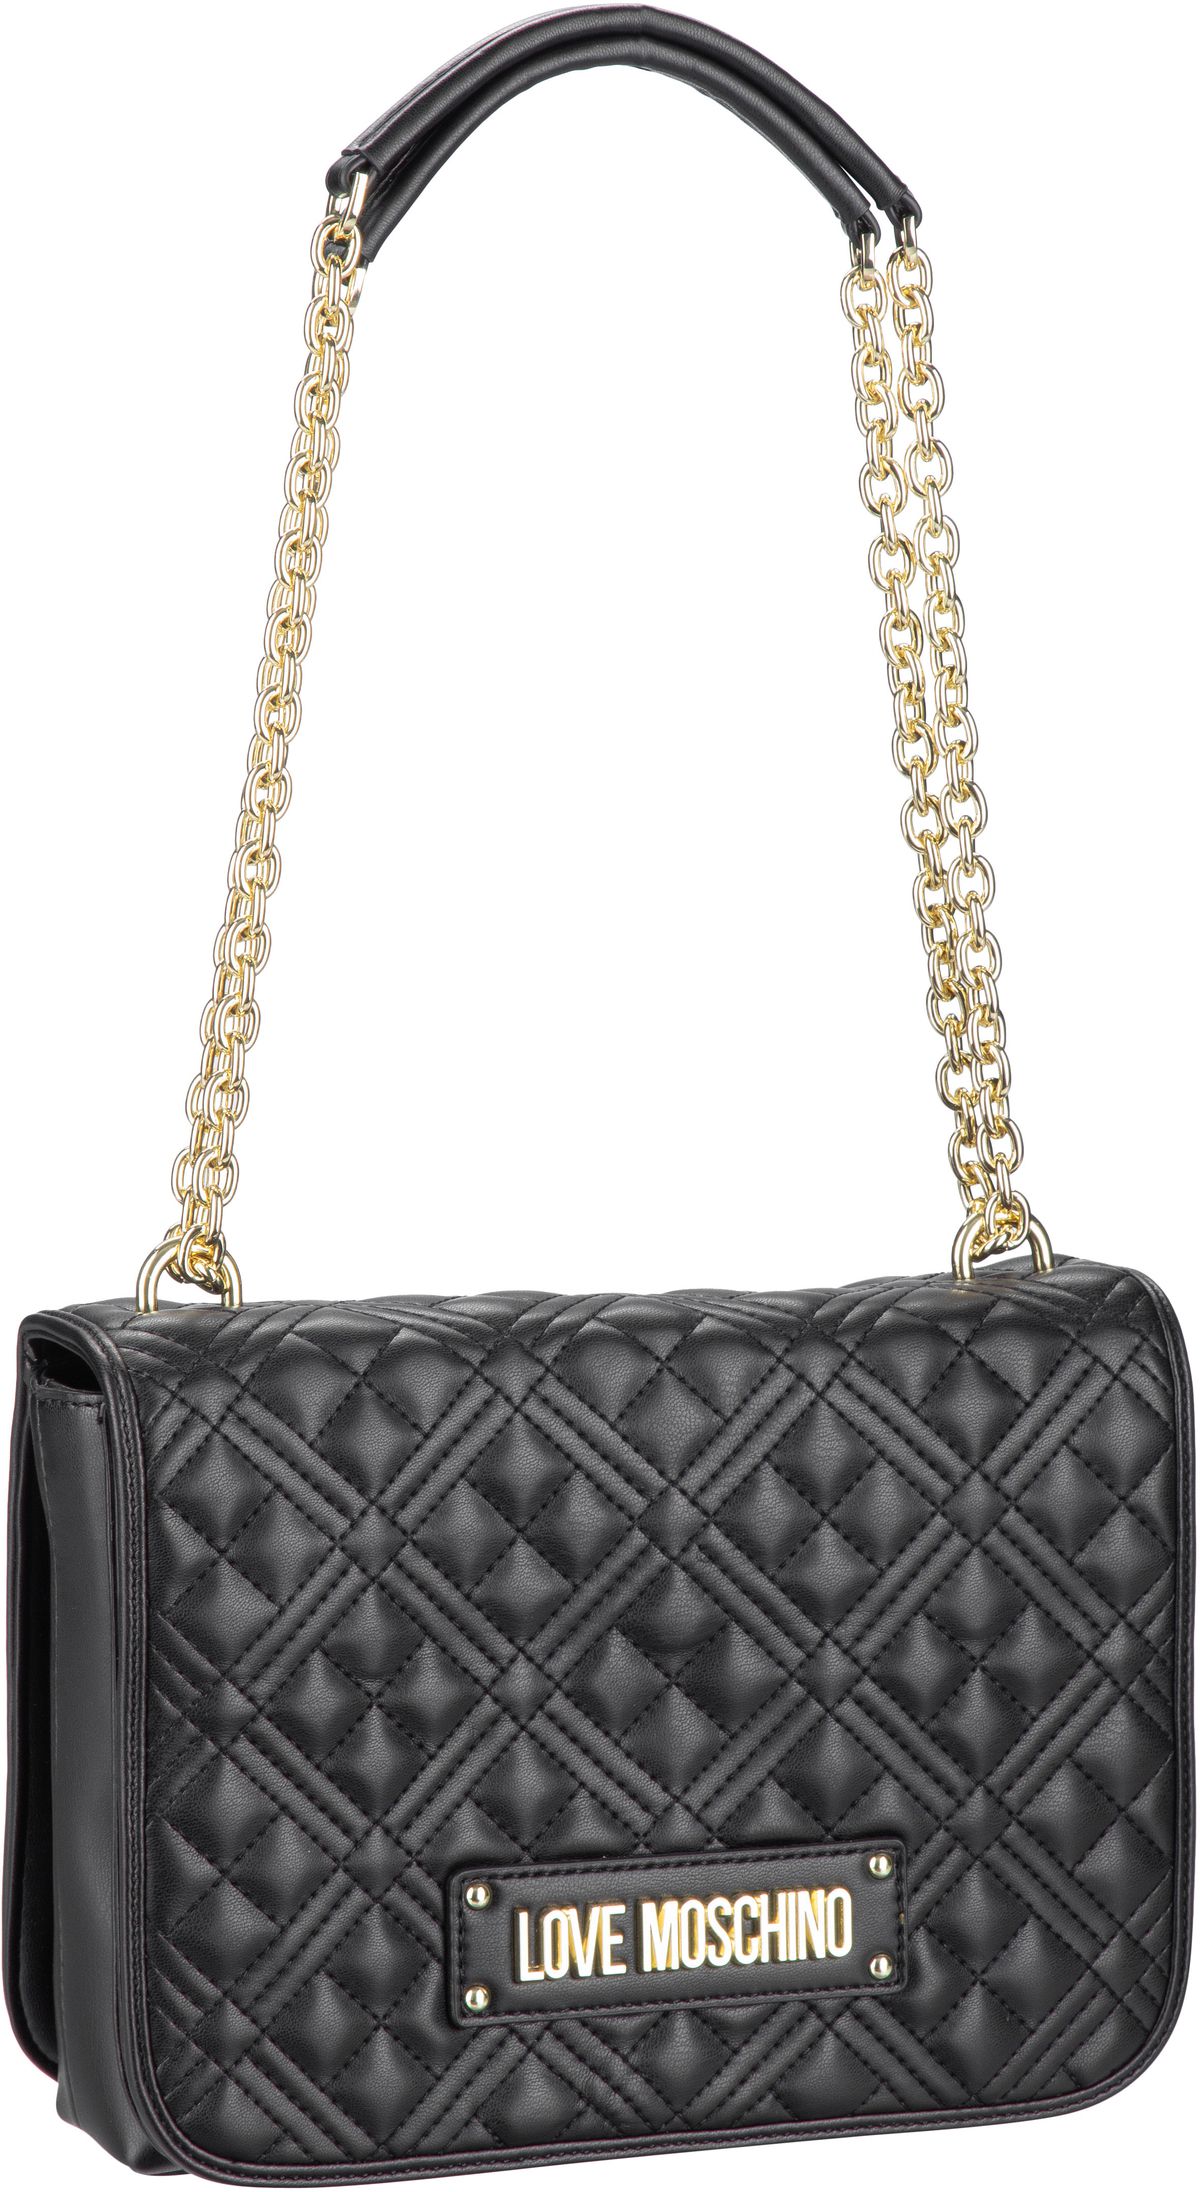 Love Moschino Quilted Bag 4000 - Black